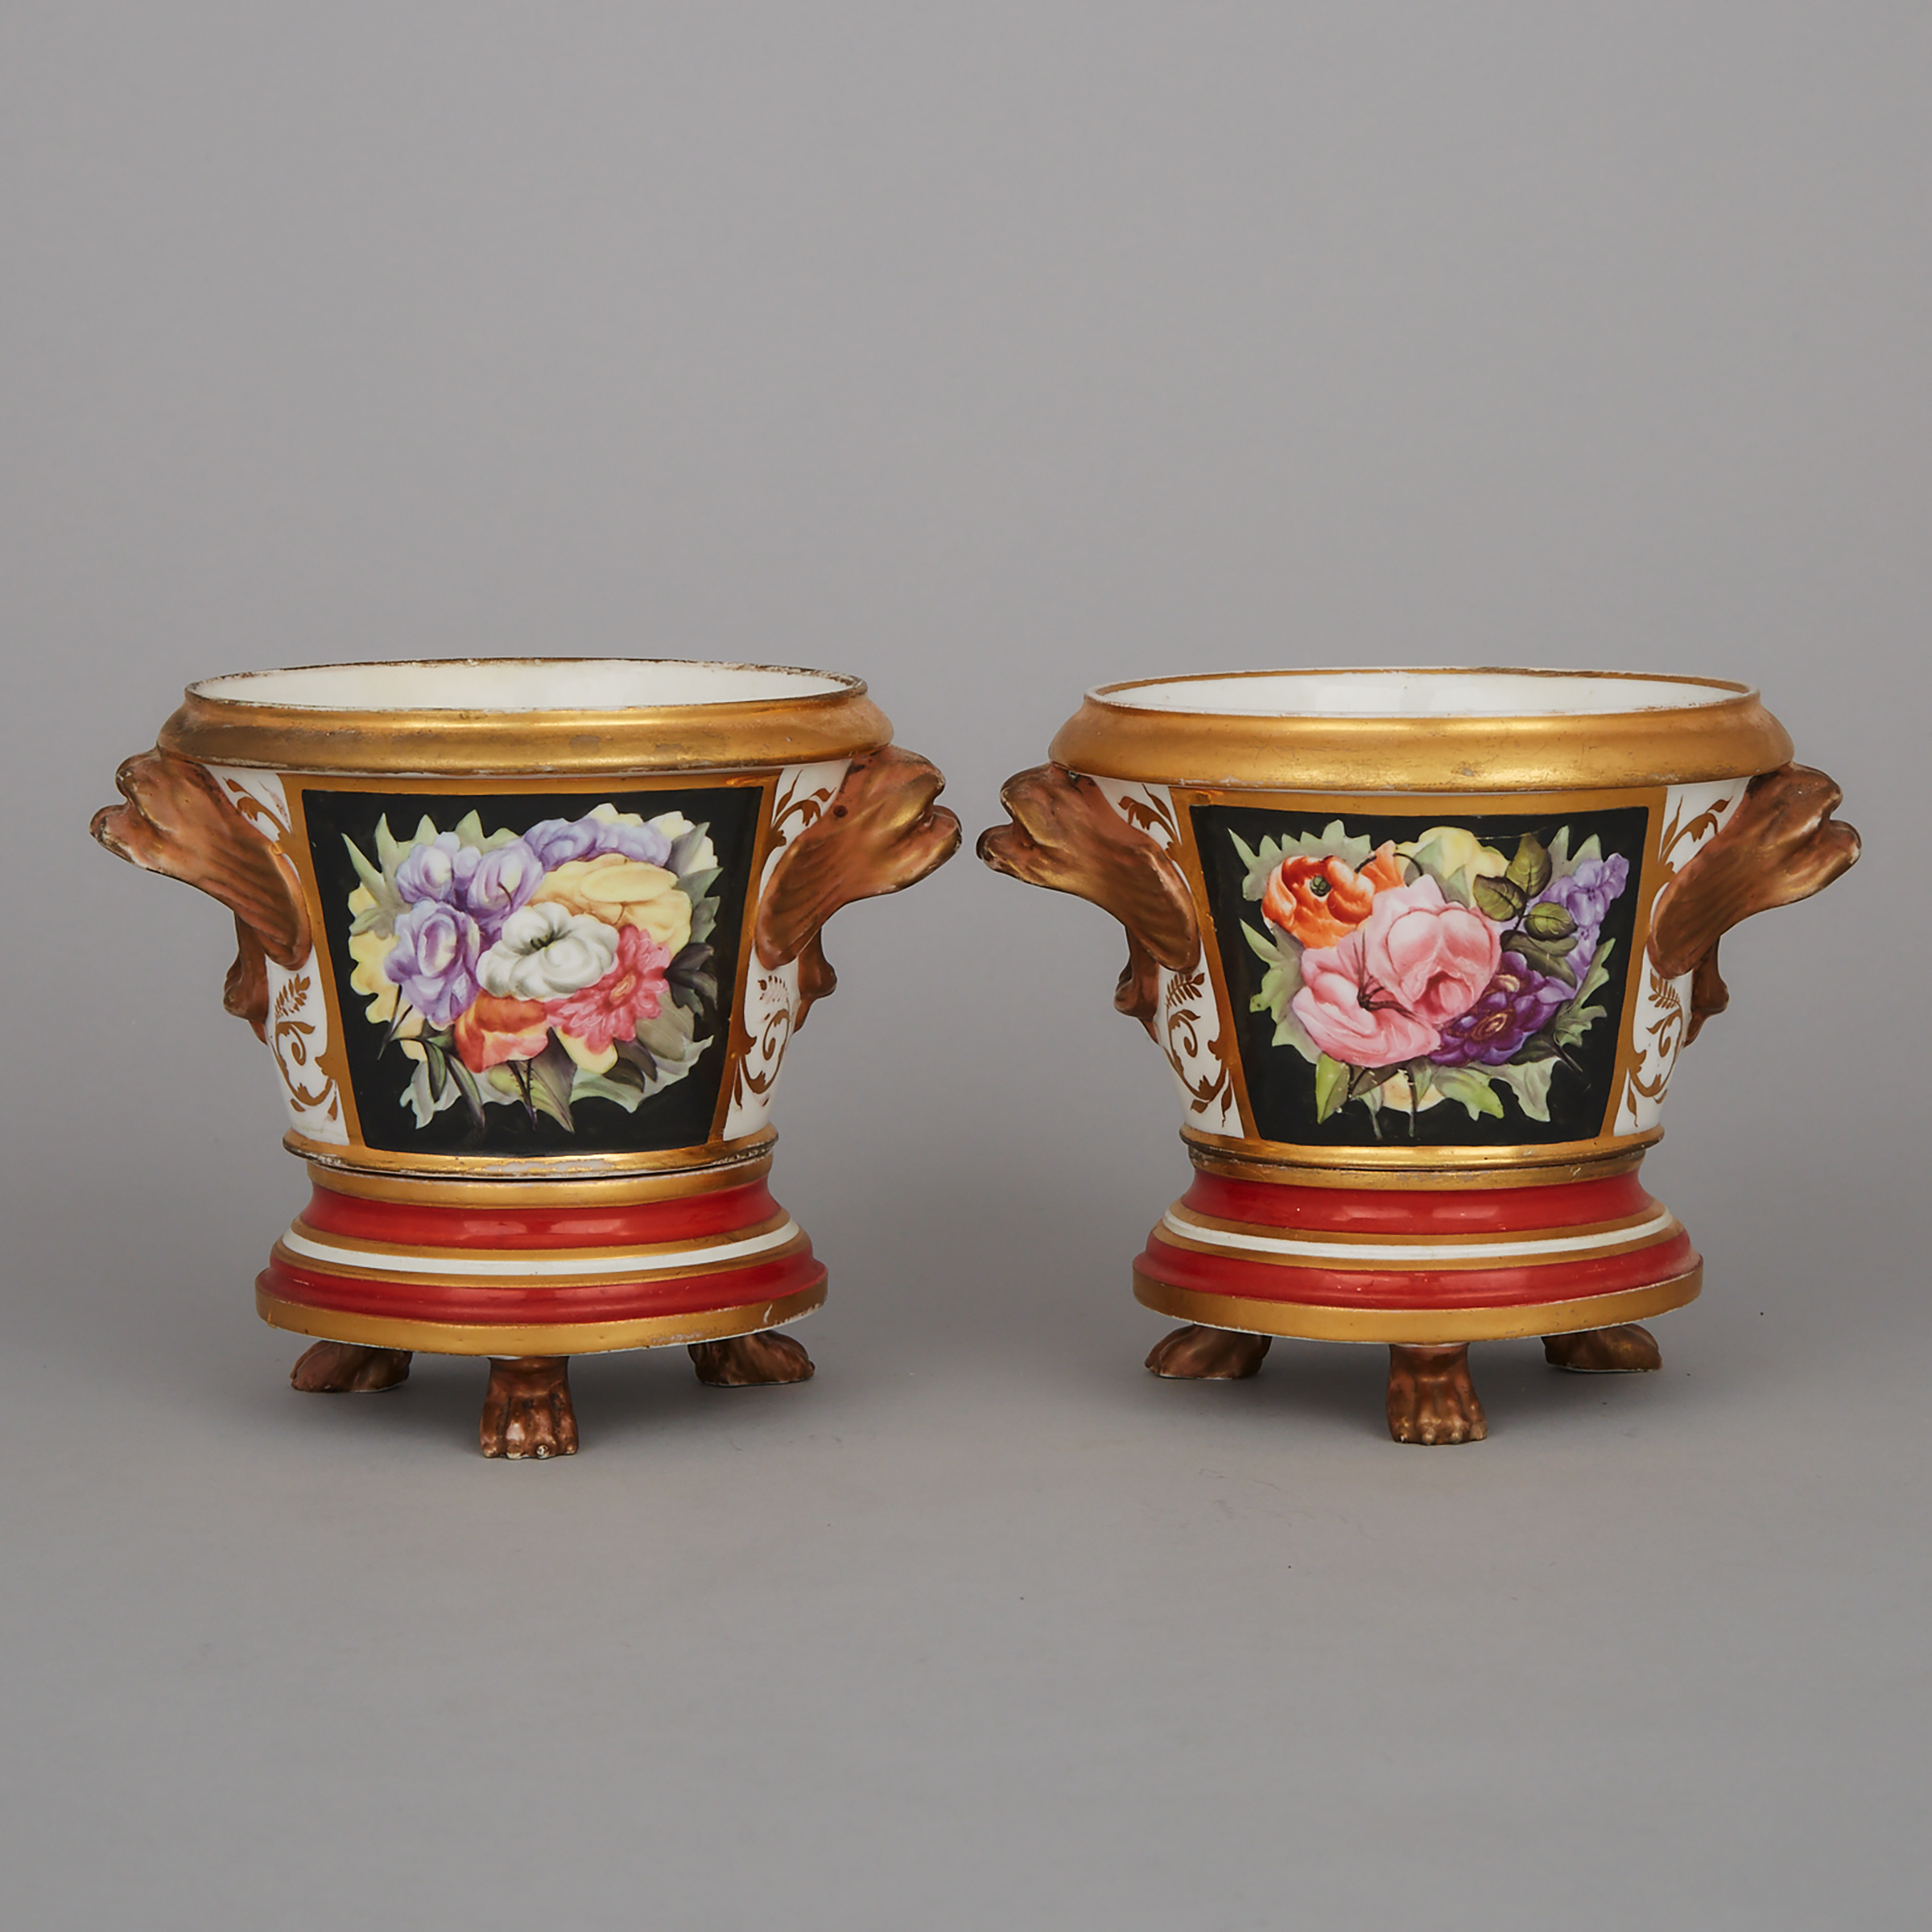 Pair of English Porcelain Cachepots and Stands, early 19th century